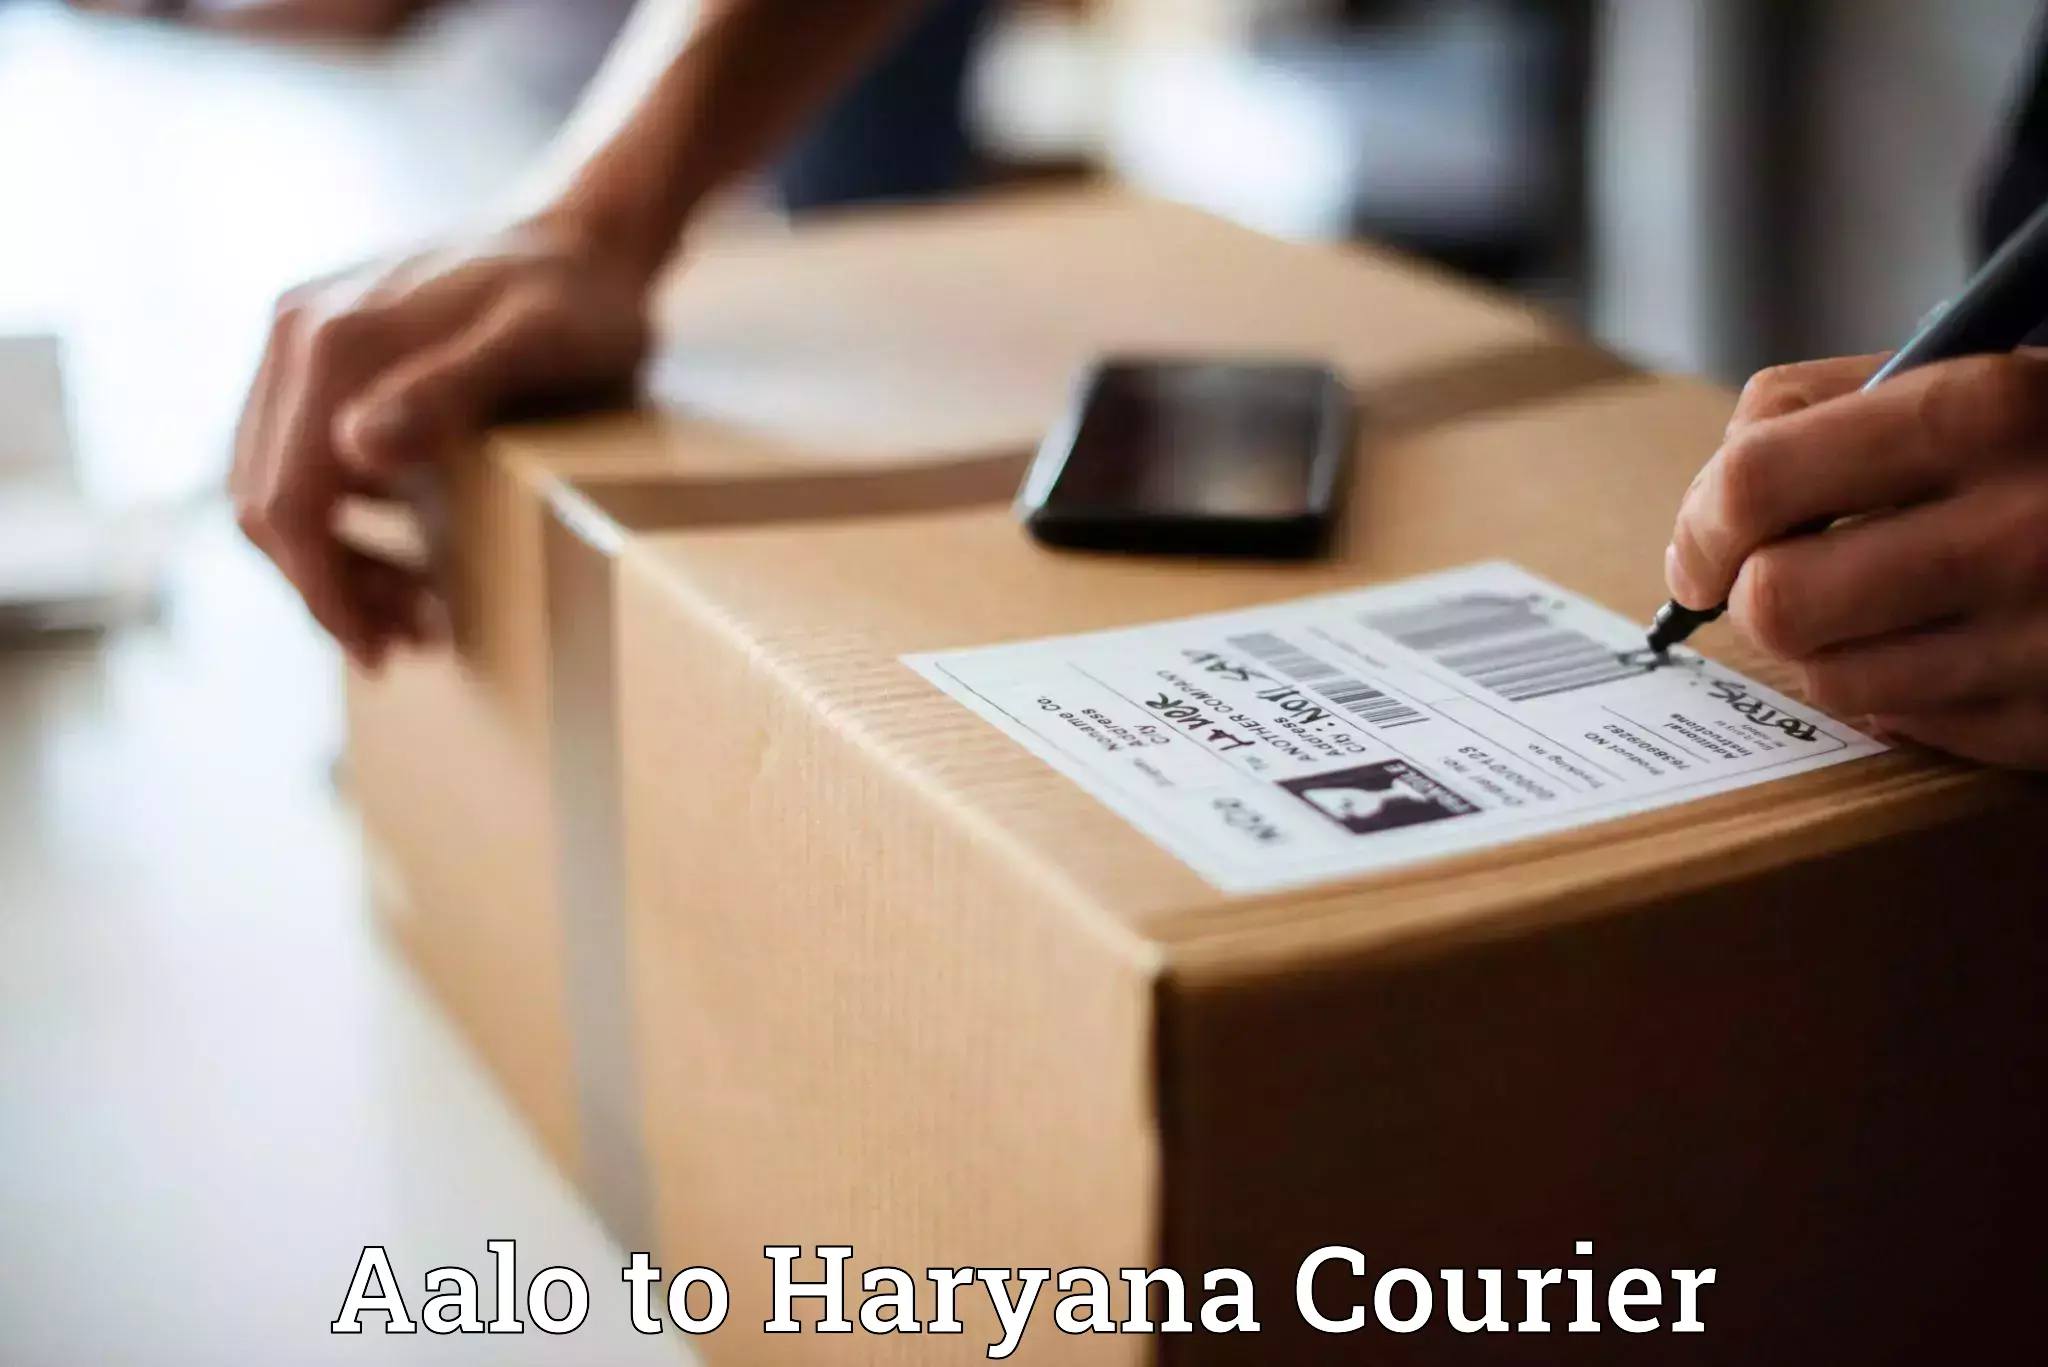 Courier service comparison Aalo to Hansi